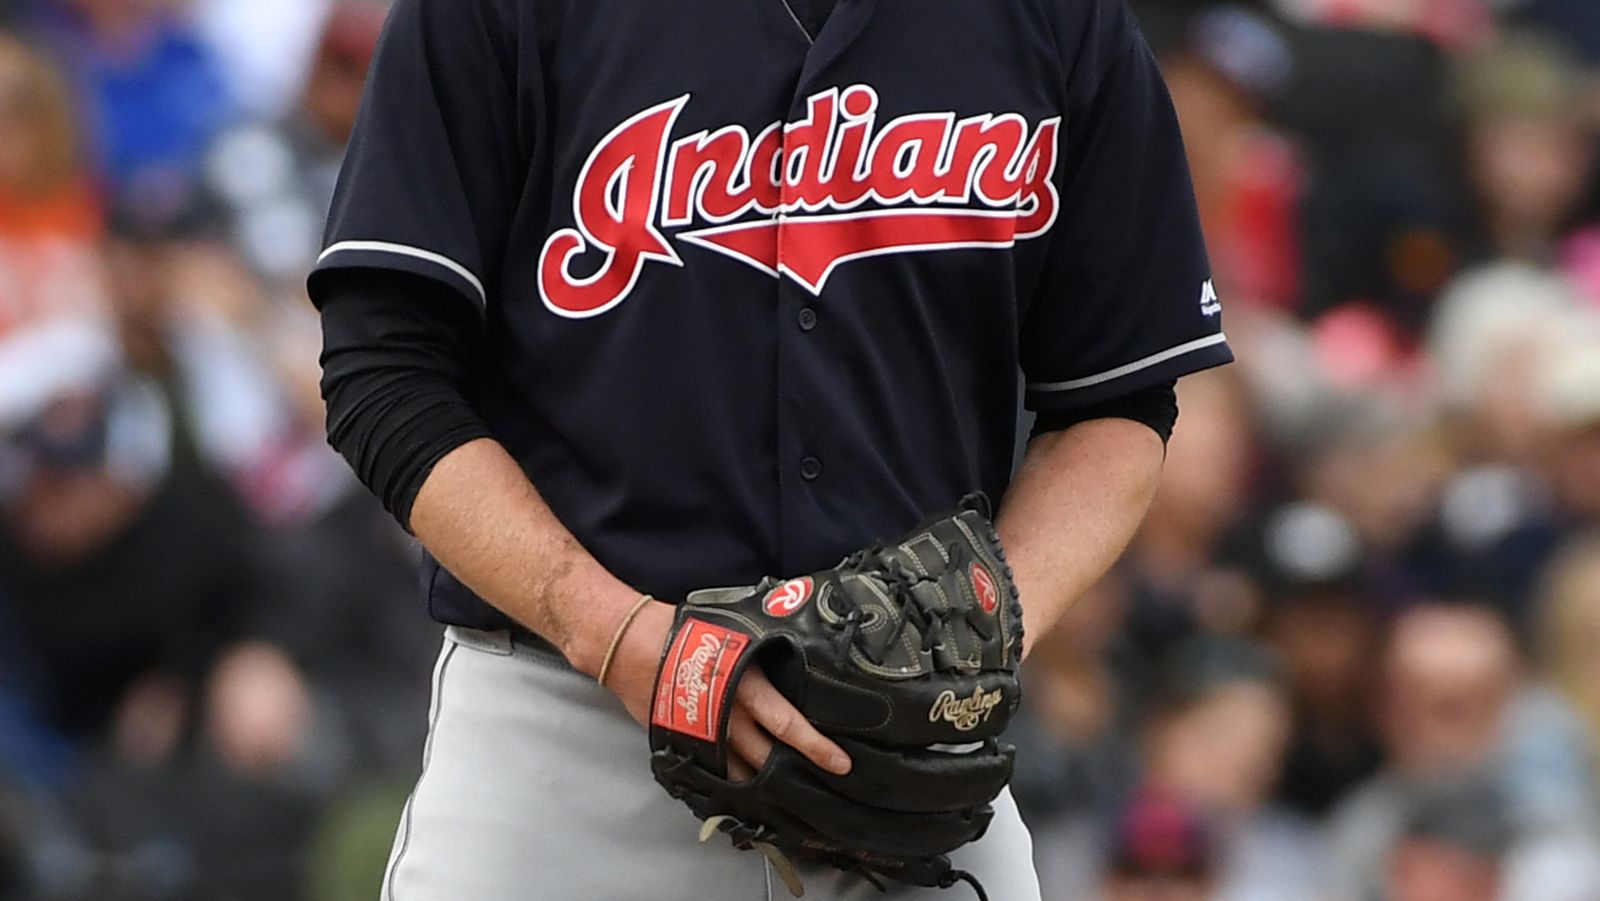 Cleveland Indians manager says it's time to change the team name |